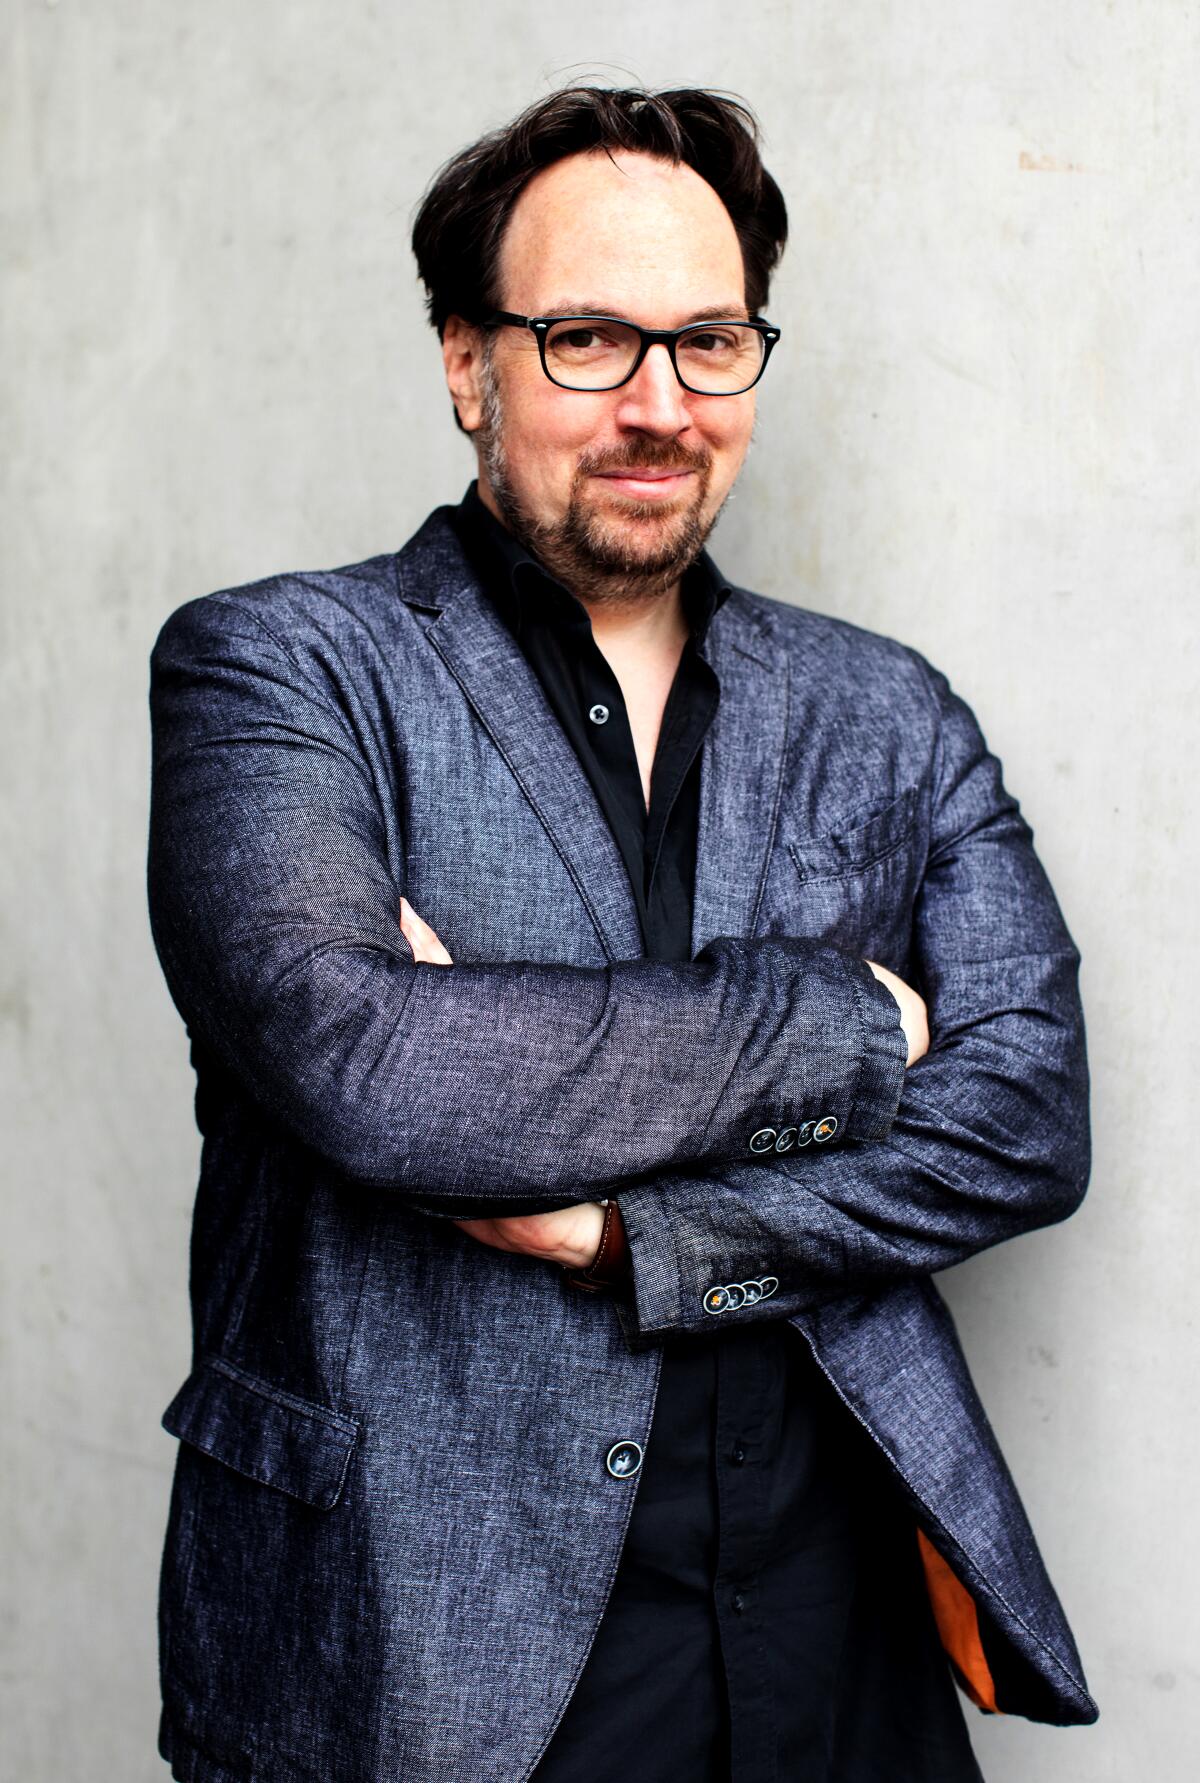 An author stands with his arms crossed, wearing glasses, a shiny gray jacket and a black shirt open at the collar.